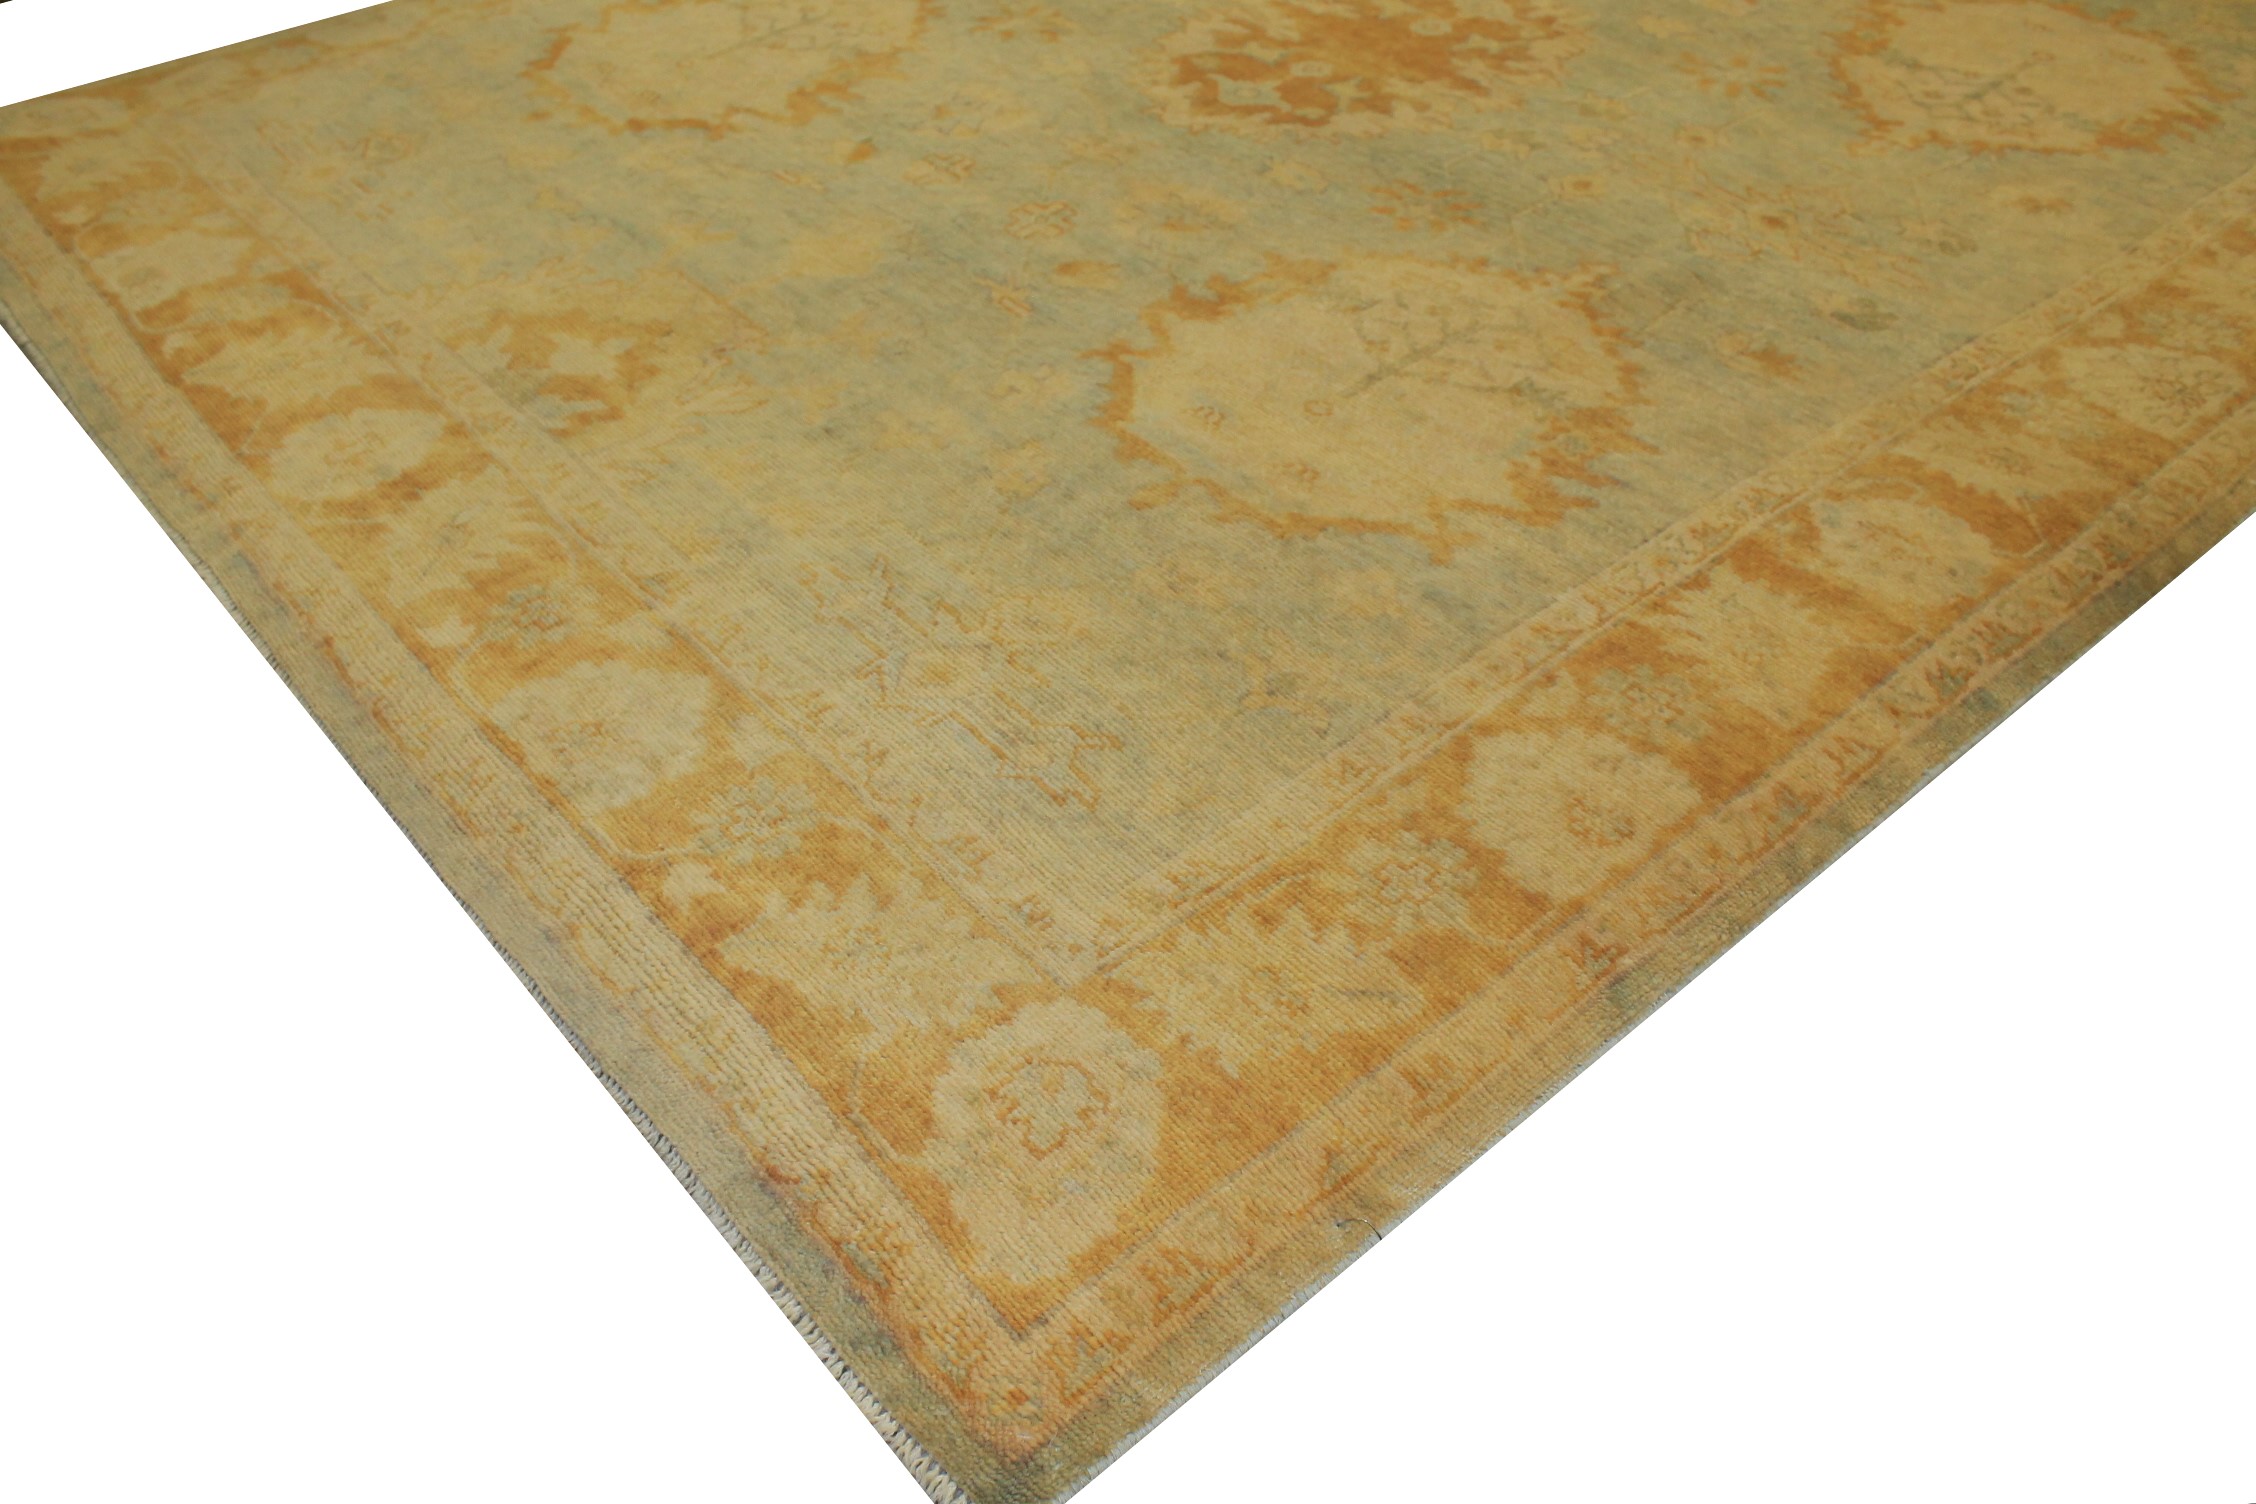 8x10 Oushak Hand Knotted Wool Area Rug - MR14860